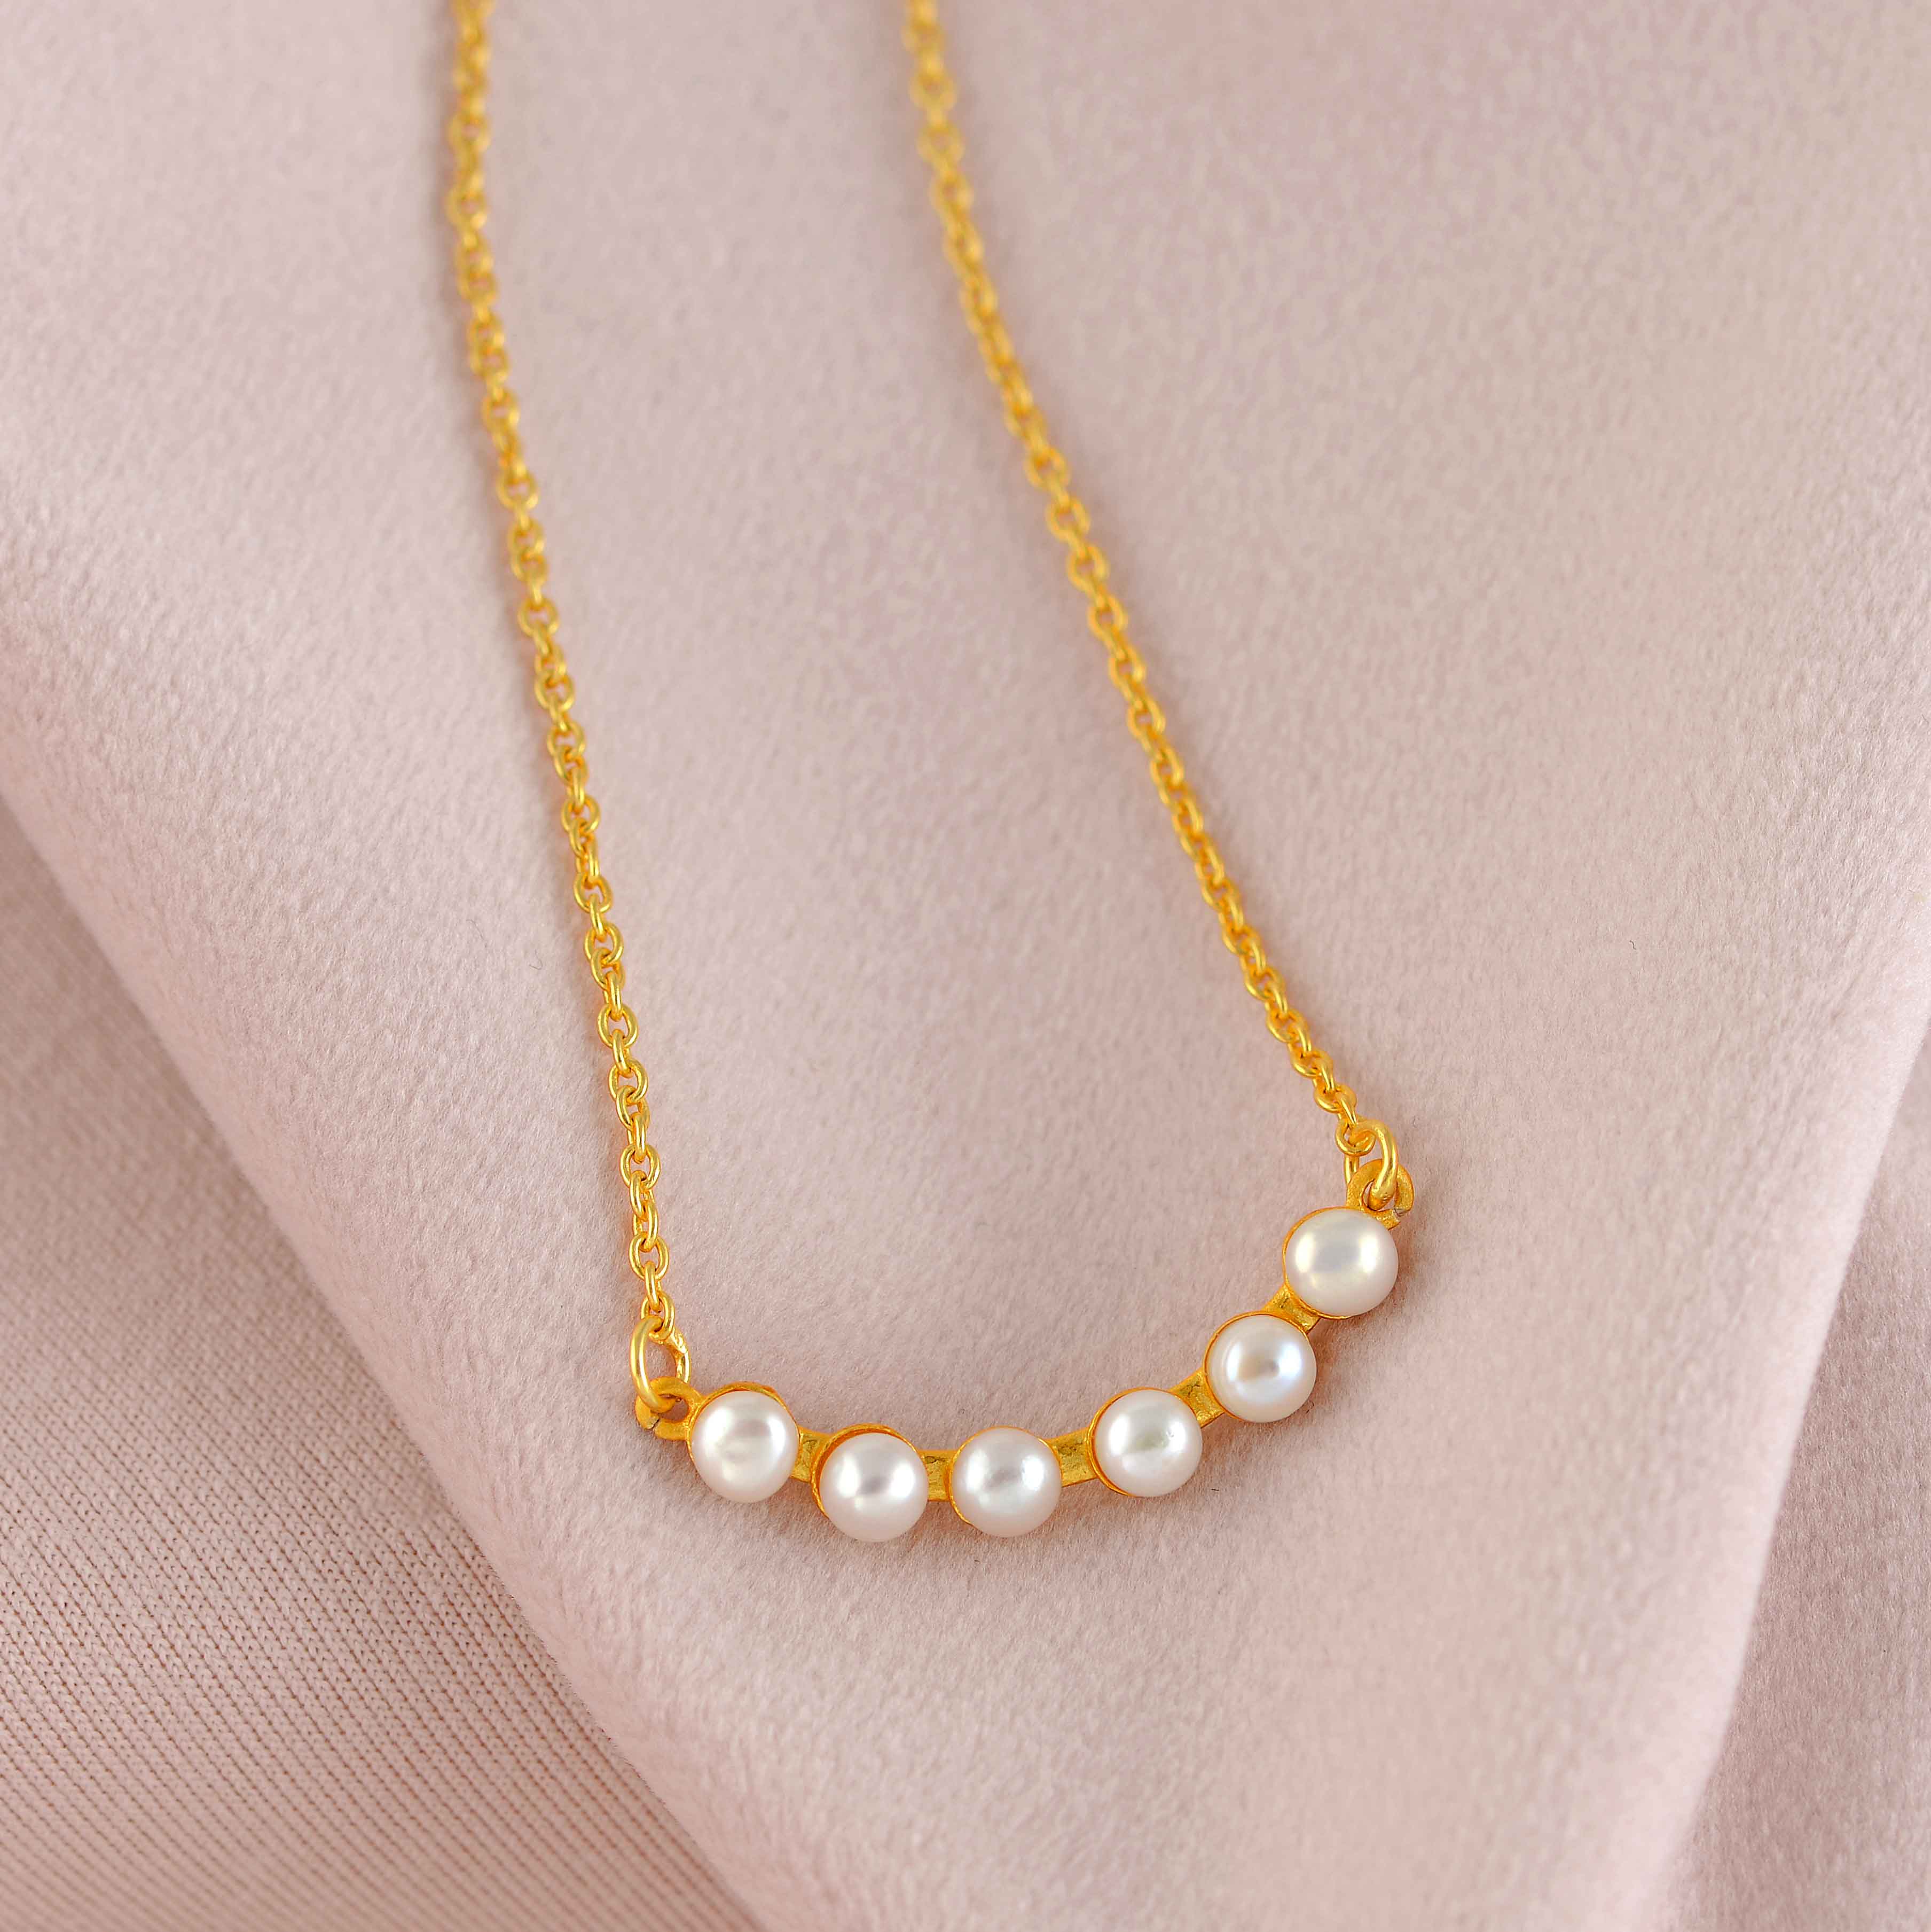 Buy Pearl Necklace, Floating Freshwater Pearl Necklace, Freshwater Pearl  Gold Necklace, Dainty Gold Pearl Necklace, Gift for Her Online in India -  Etsy